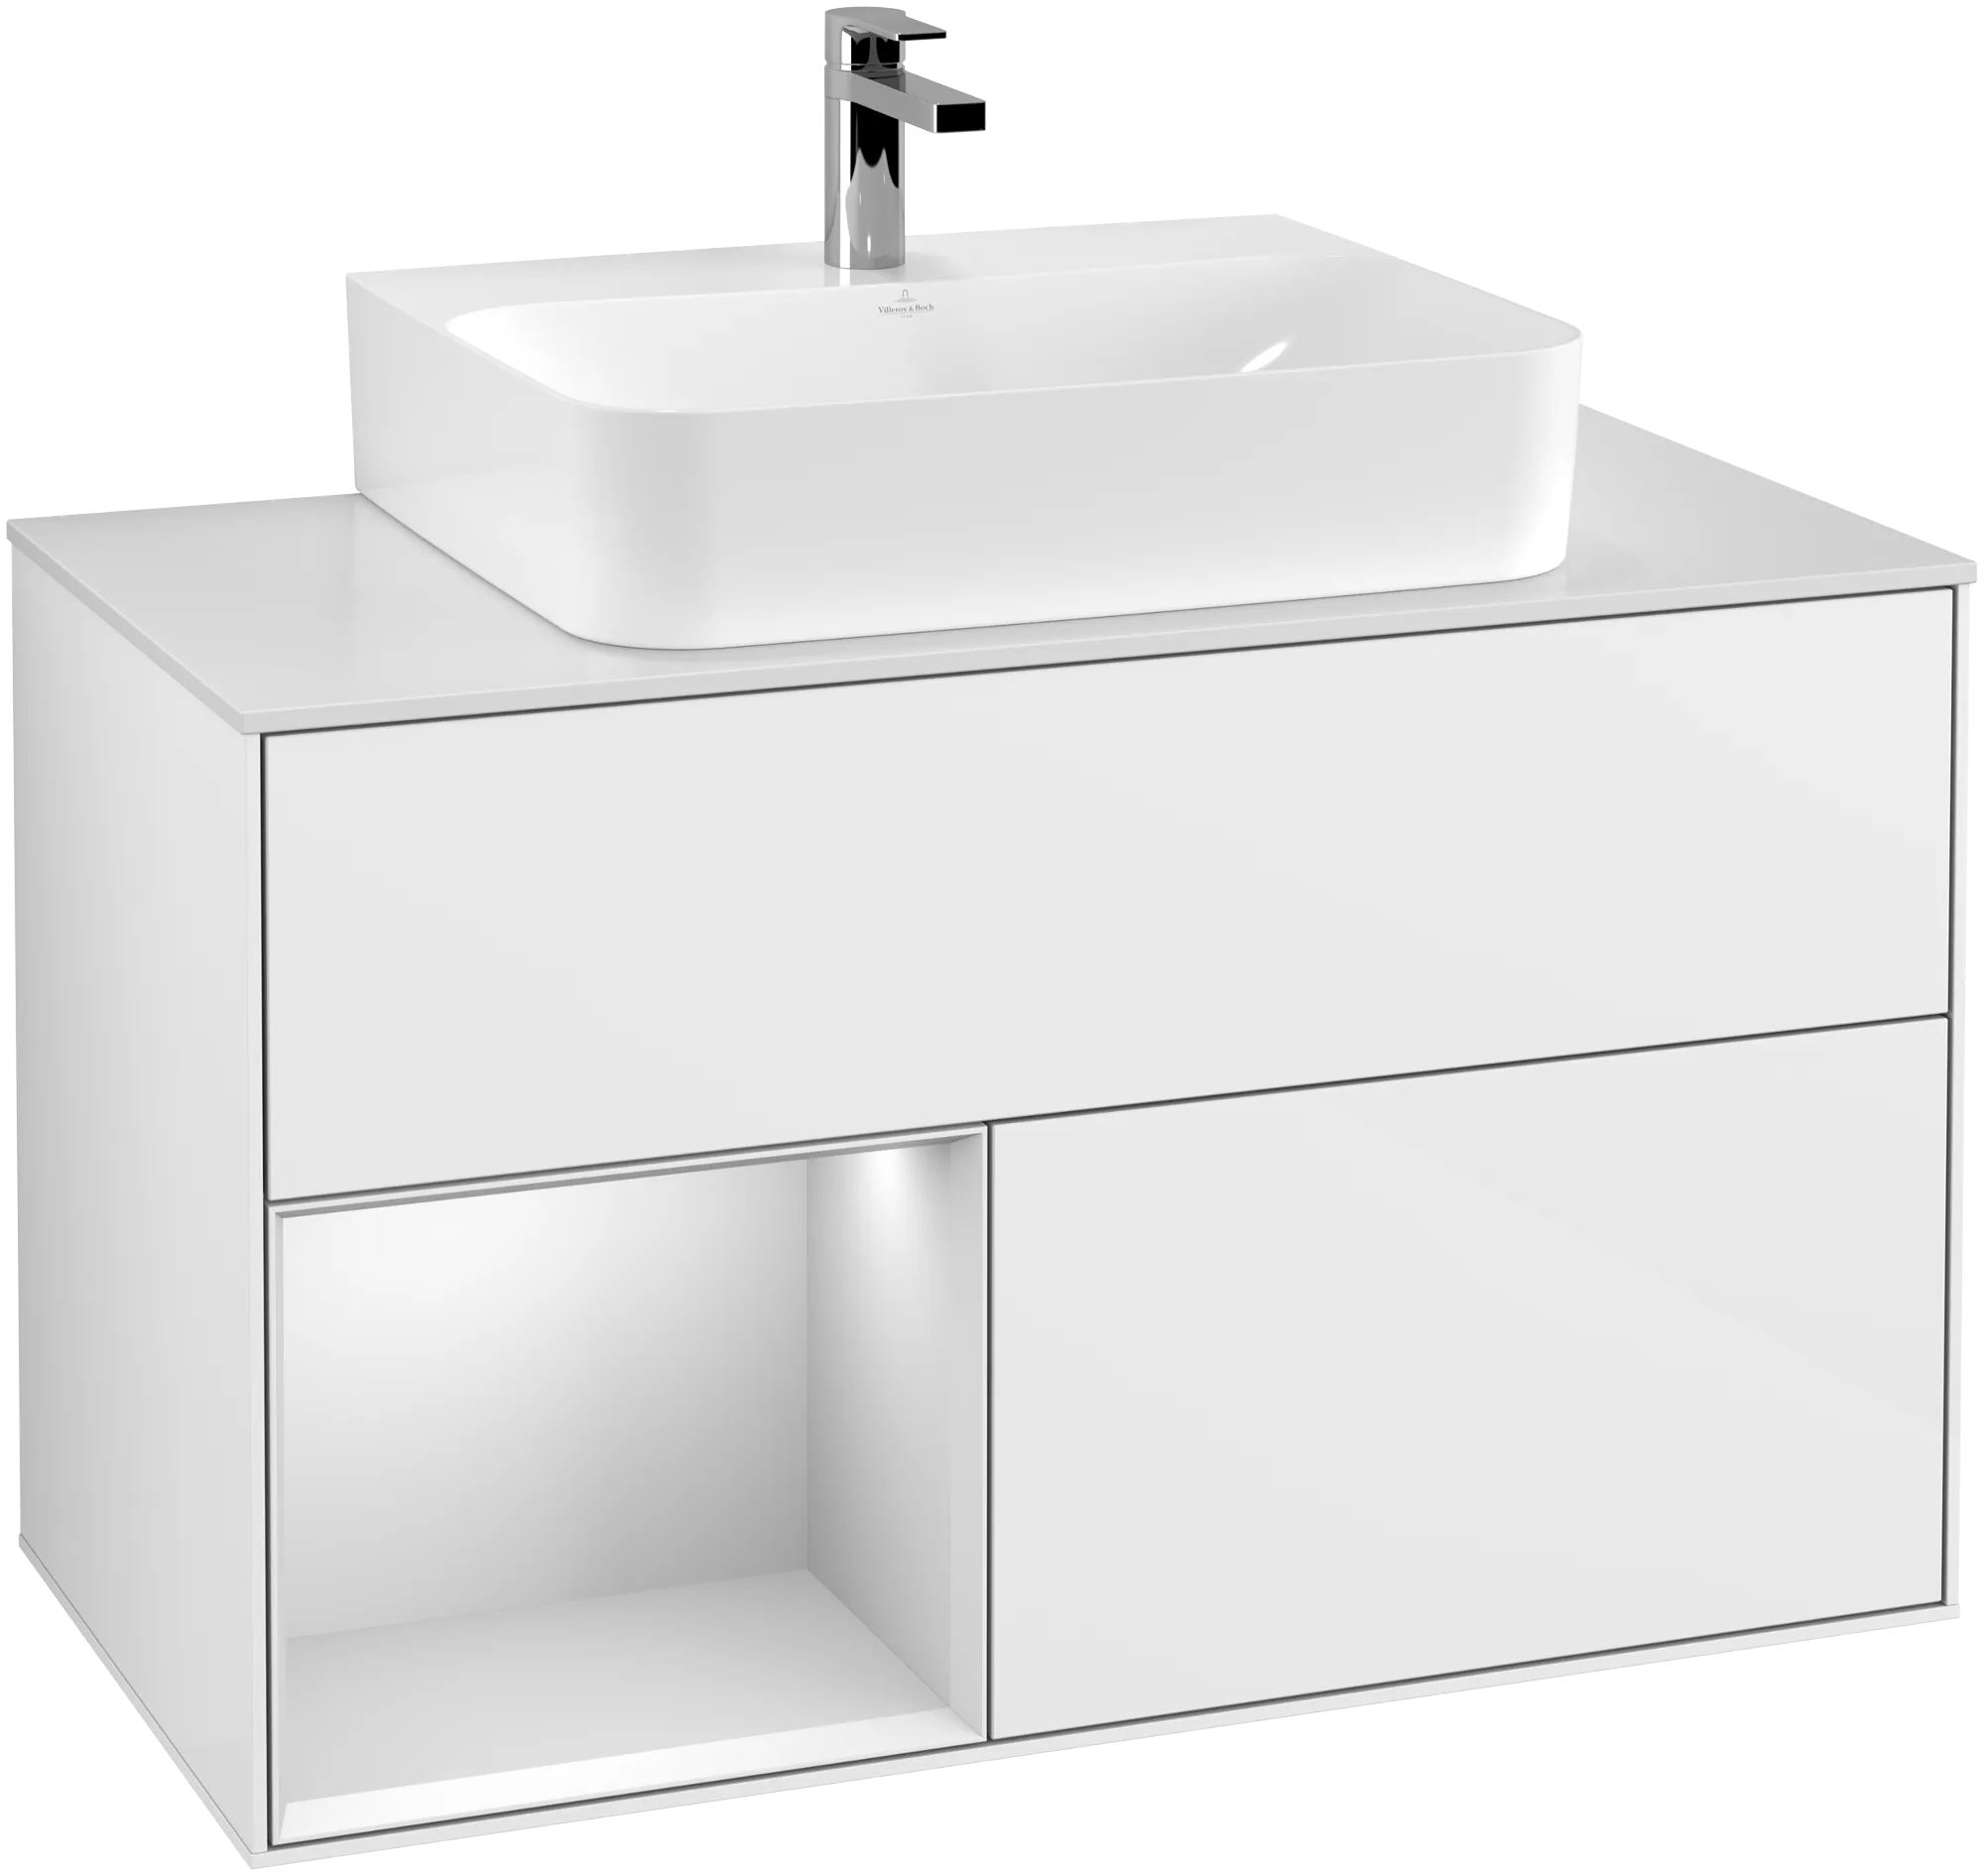 Зображення з  VILLEROY BOCH Finion Vanity unit, with lighting, 2 pull-out compartments, 1000 x 603 x 501 mm, Glossy White Lacquer / White Matt Lacquer / Glass White Matt #G111MTGF